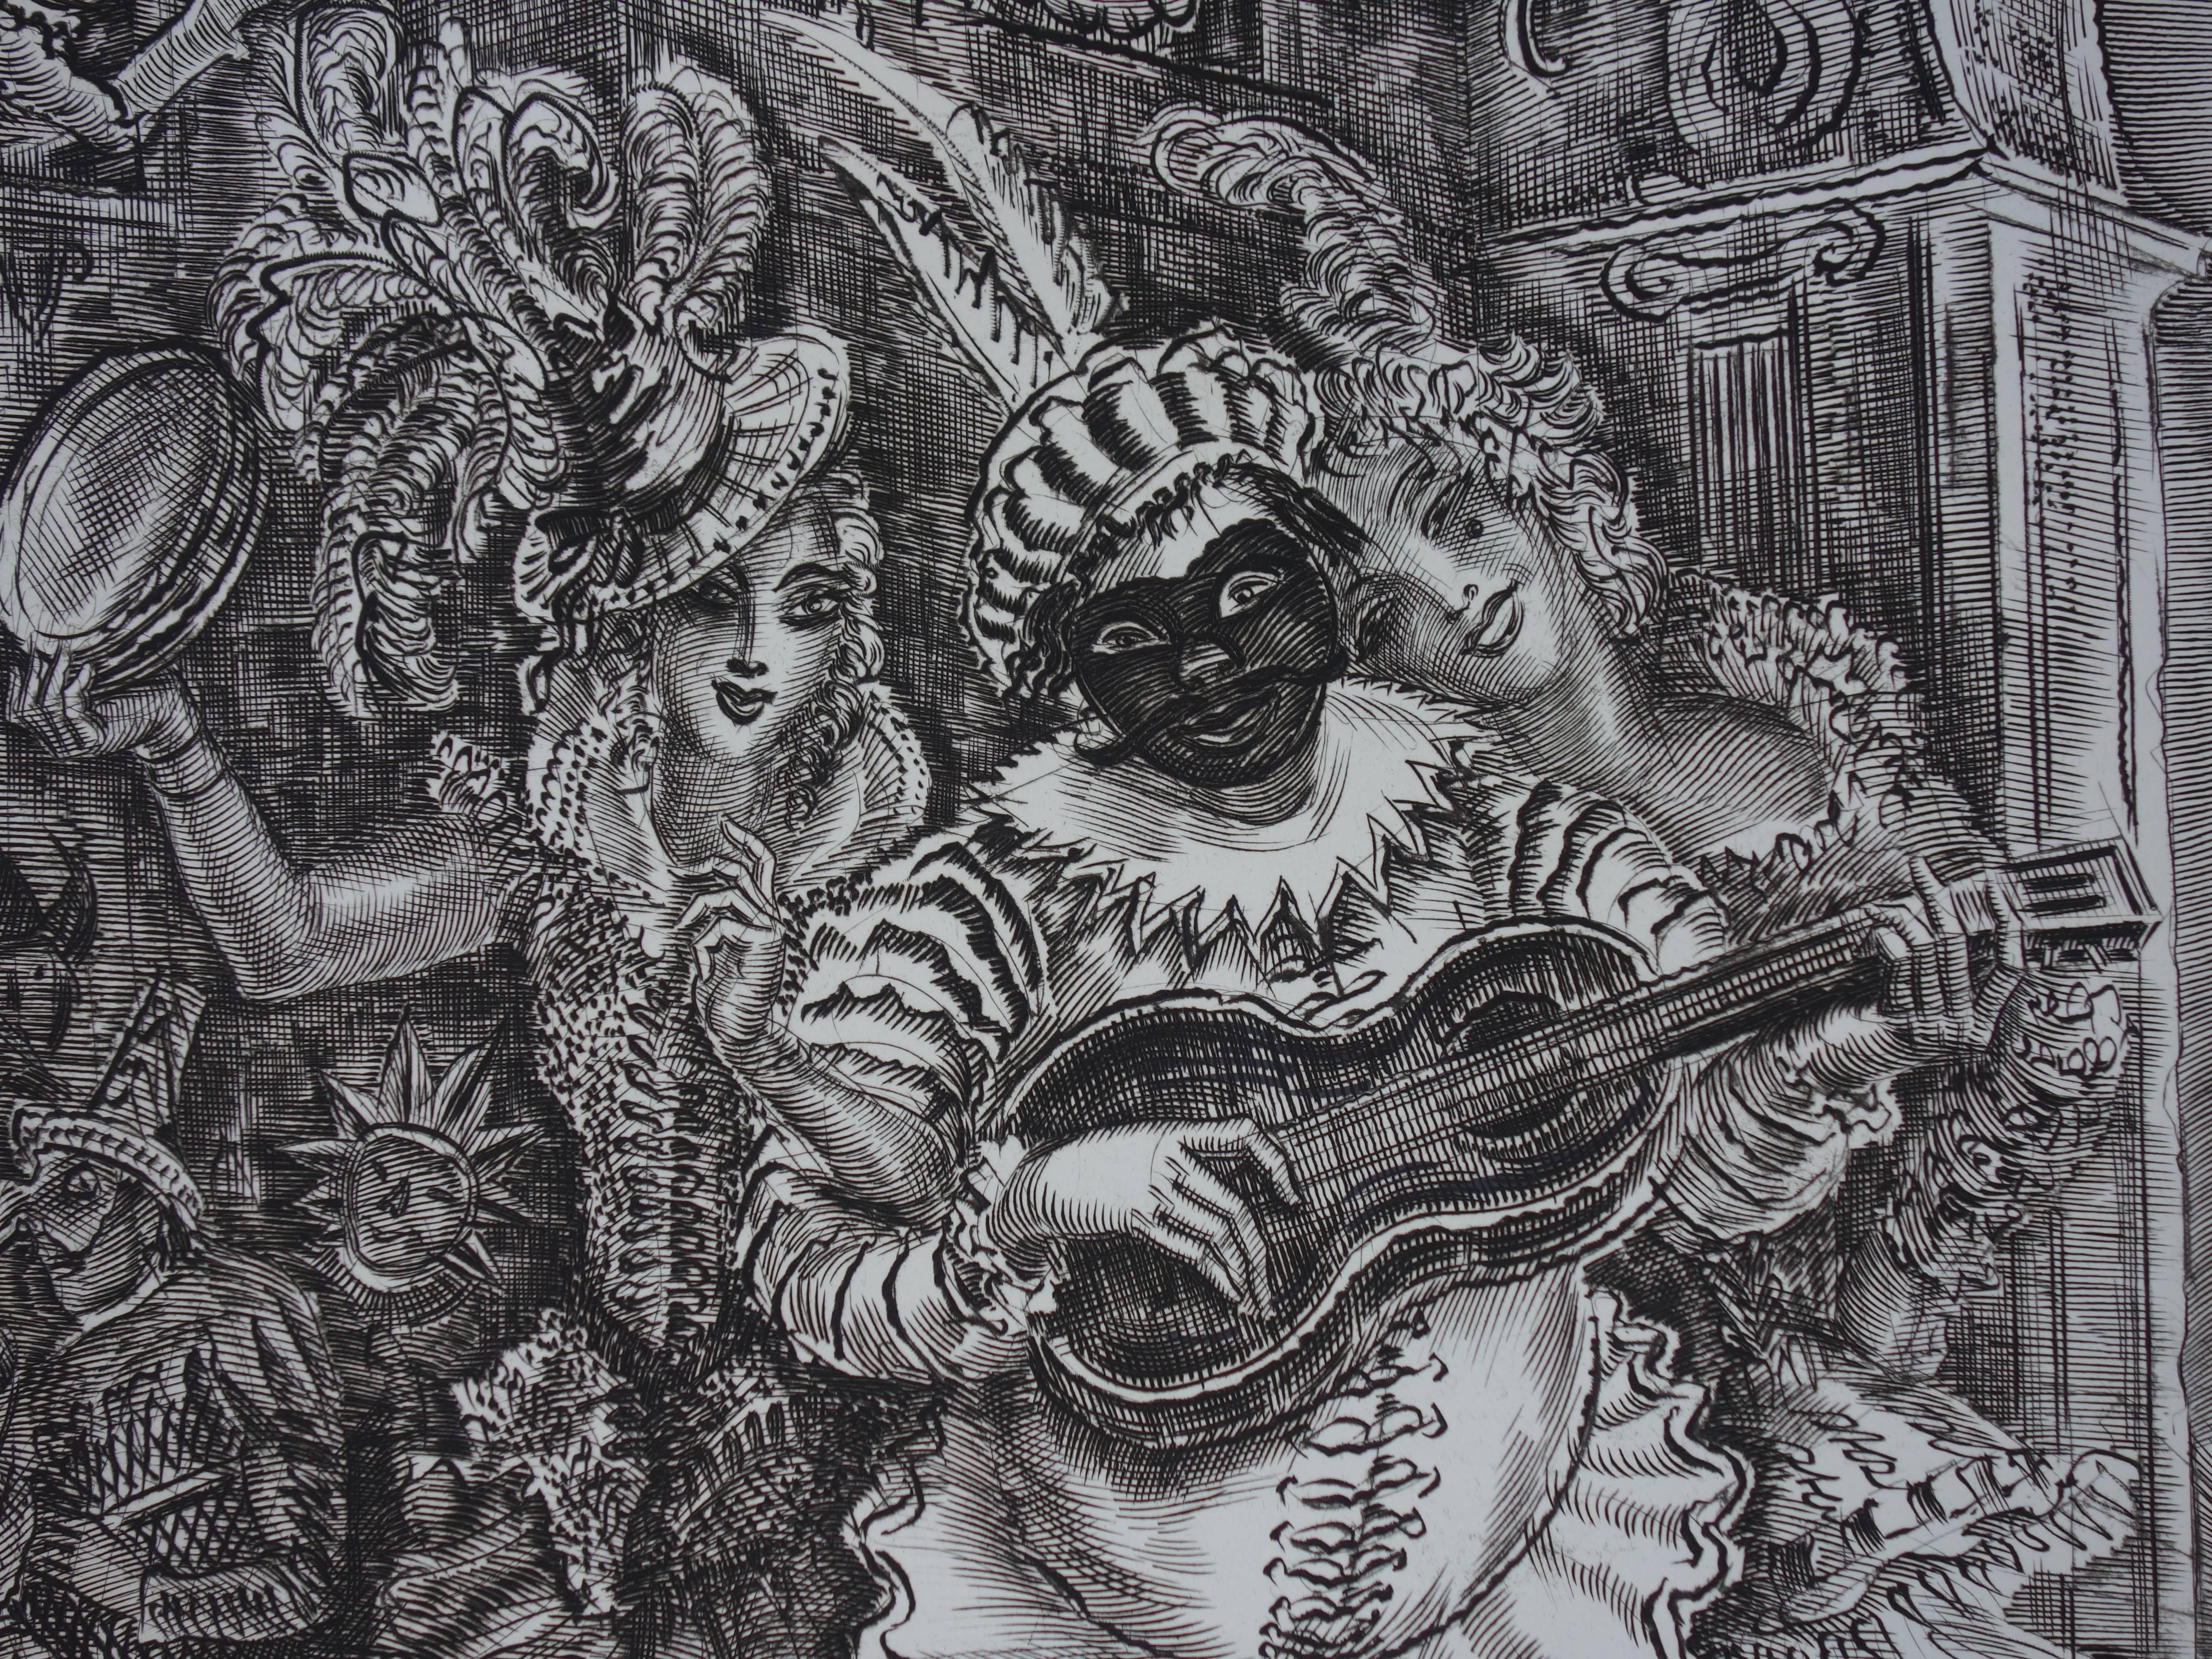 February : Carnival time - Original handsigned etching - Exceptional n° 1/100 - Gray Figurative Print by Albert Decaris